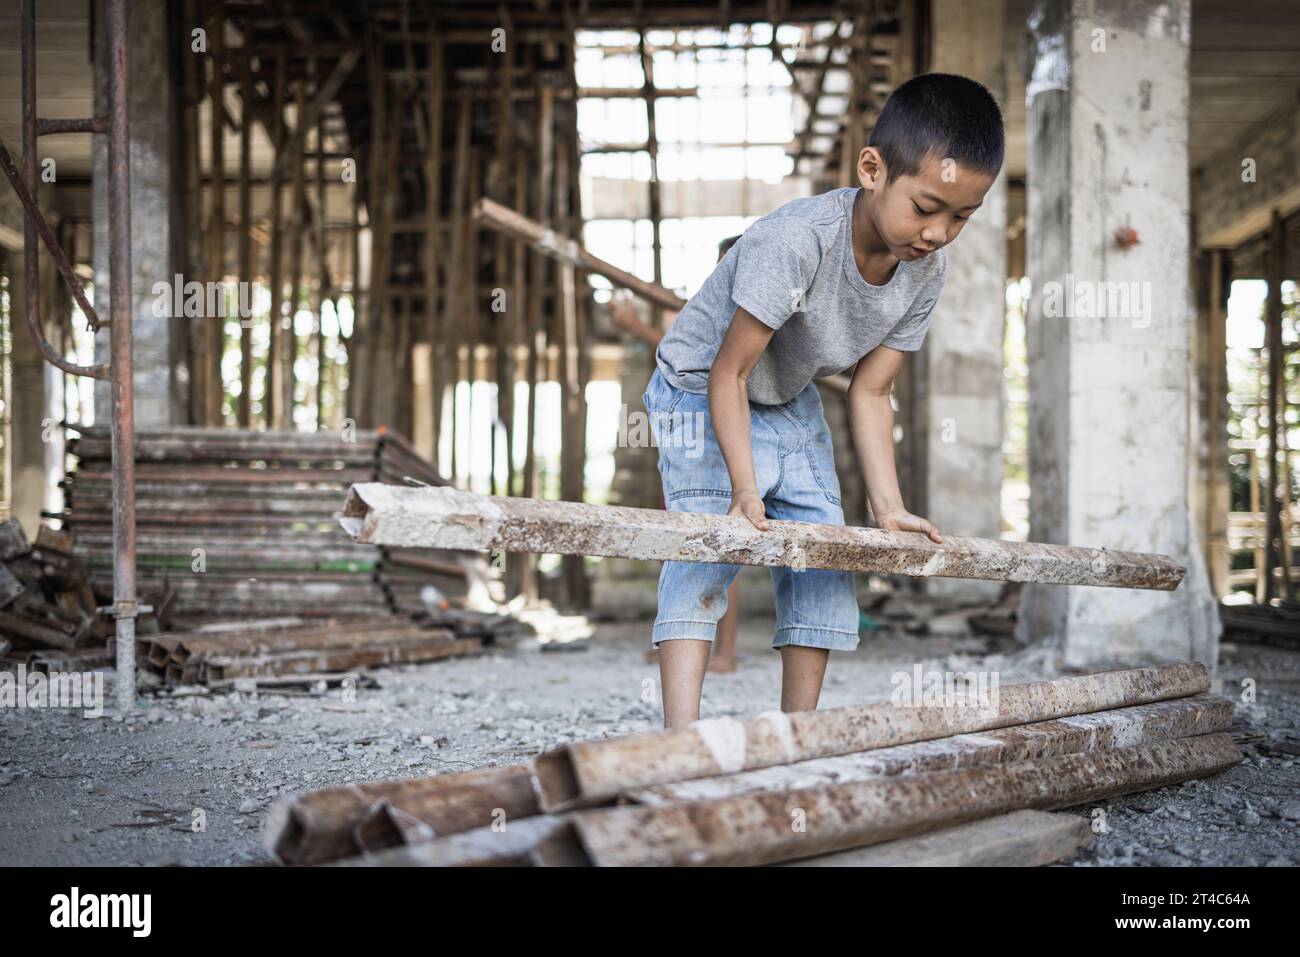 Poor children forced to do construction work, child labor, abuse To the rights of children, victims of human trafficking, World Day Against Child Labo Stock Photo